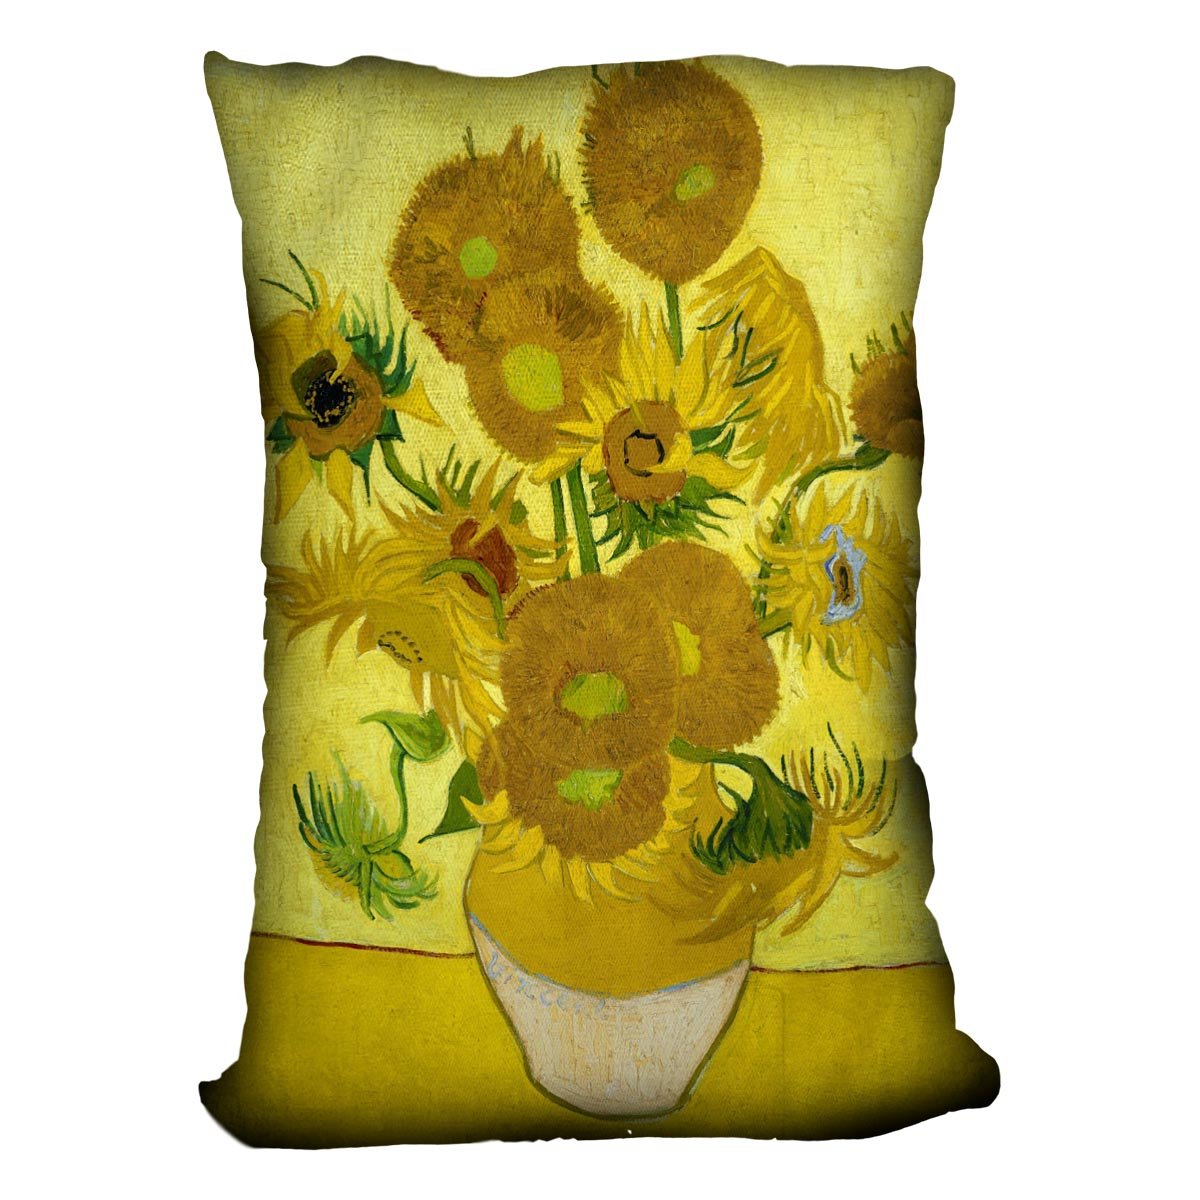 Another vase of sunflowers Throw Pillow